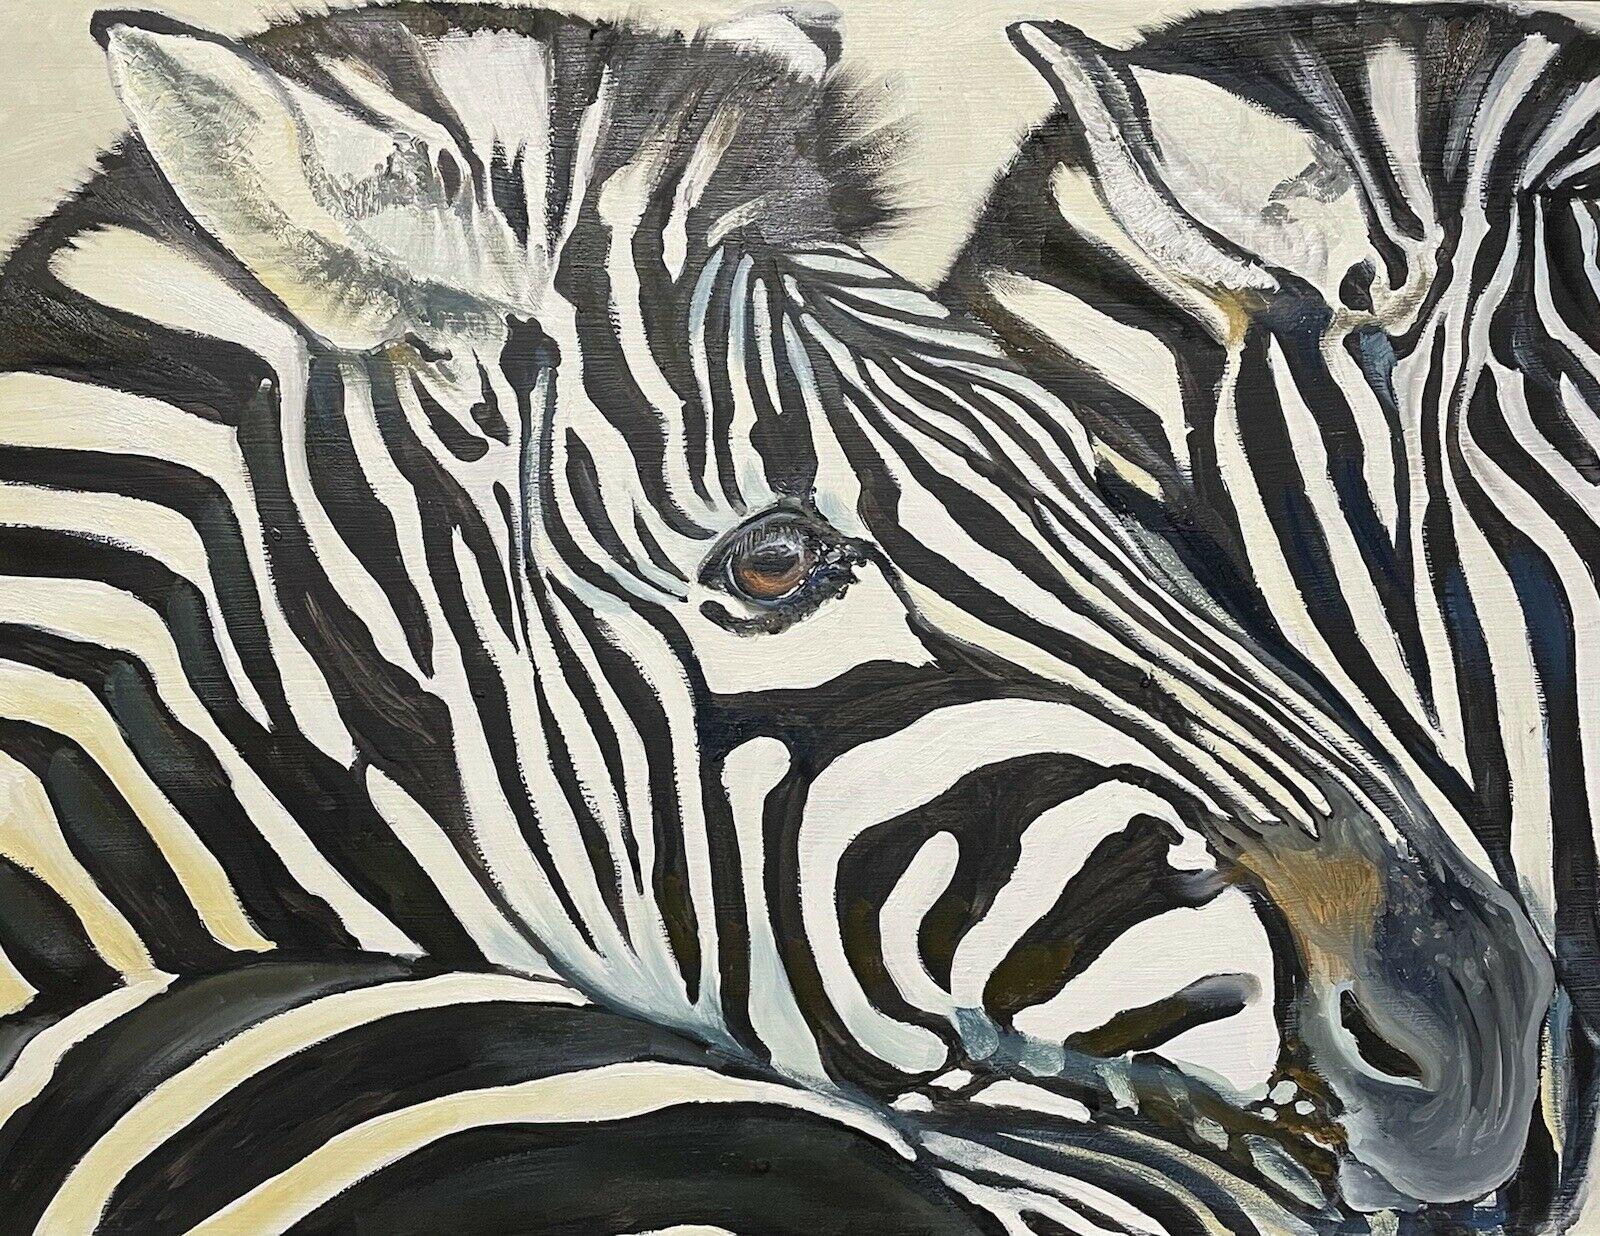 Artist/ School: by Clive Fredriksson, British contemporary

Title: Two Zebras

Medium: oil painting, on board. 

Size:  framed: 21  x 53 inches
         painting: 16 x 48 inches
         
Provenance: private collection, UK

Condition: The painting